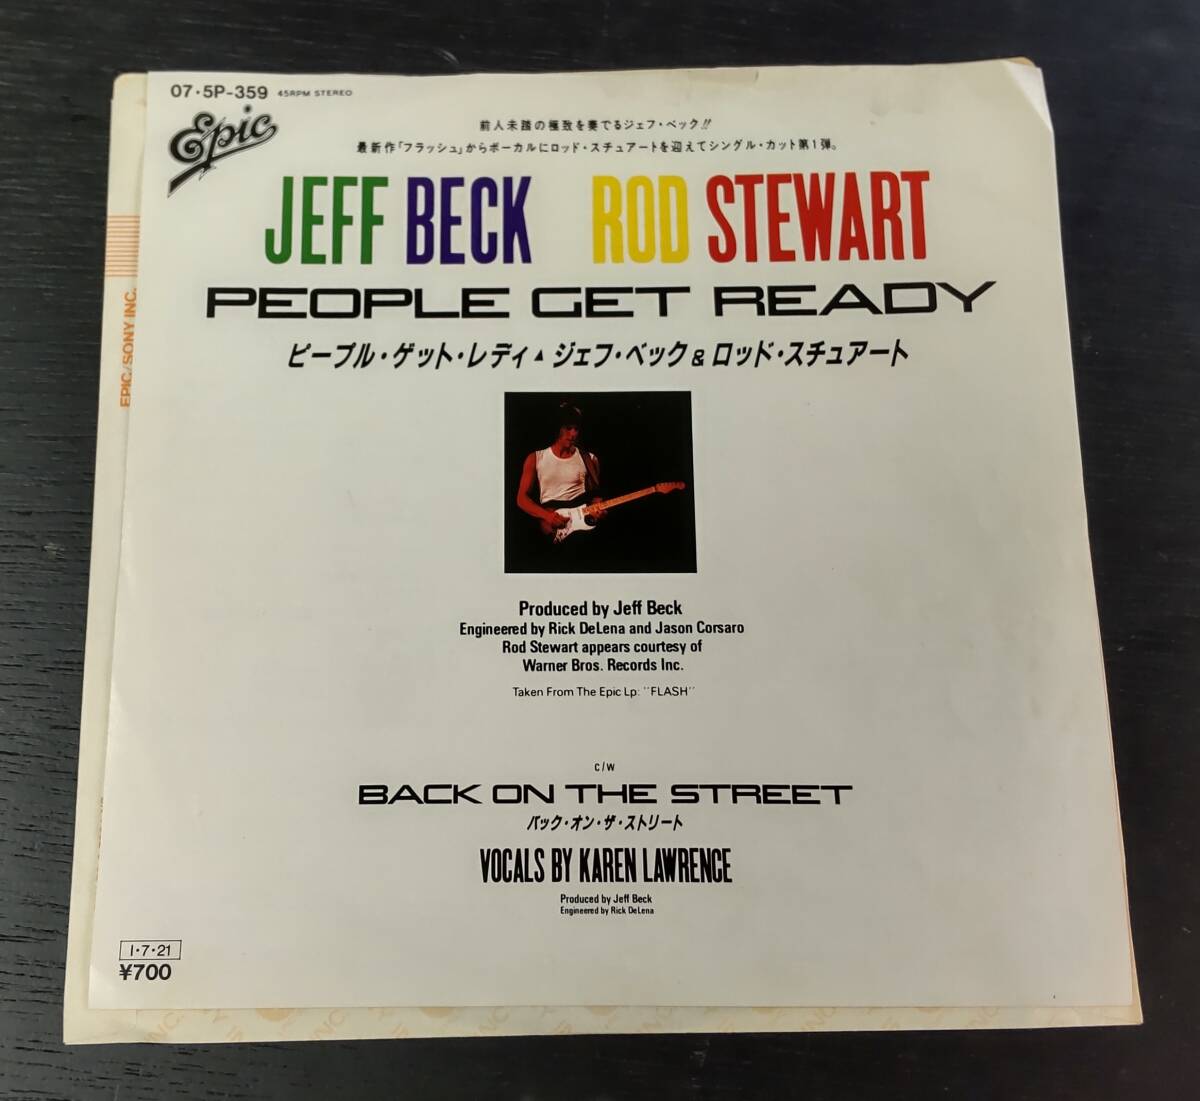 7inch ★ JEFF BECK / ROD STEWART - People get ready / Back on the street ★ 07・5P-359 シングル　ジェフ・ベック_画像1